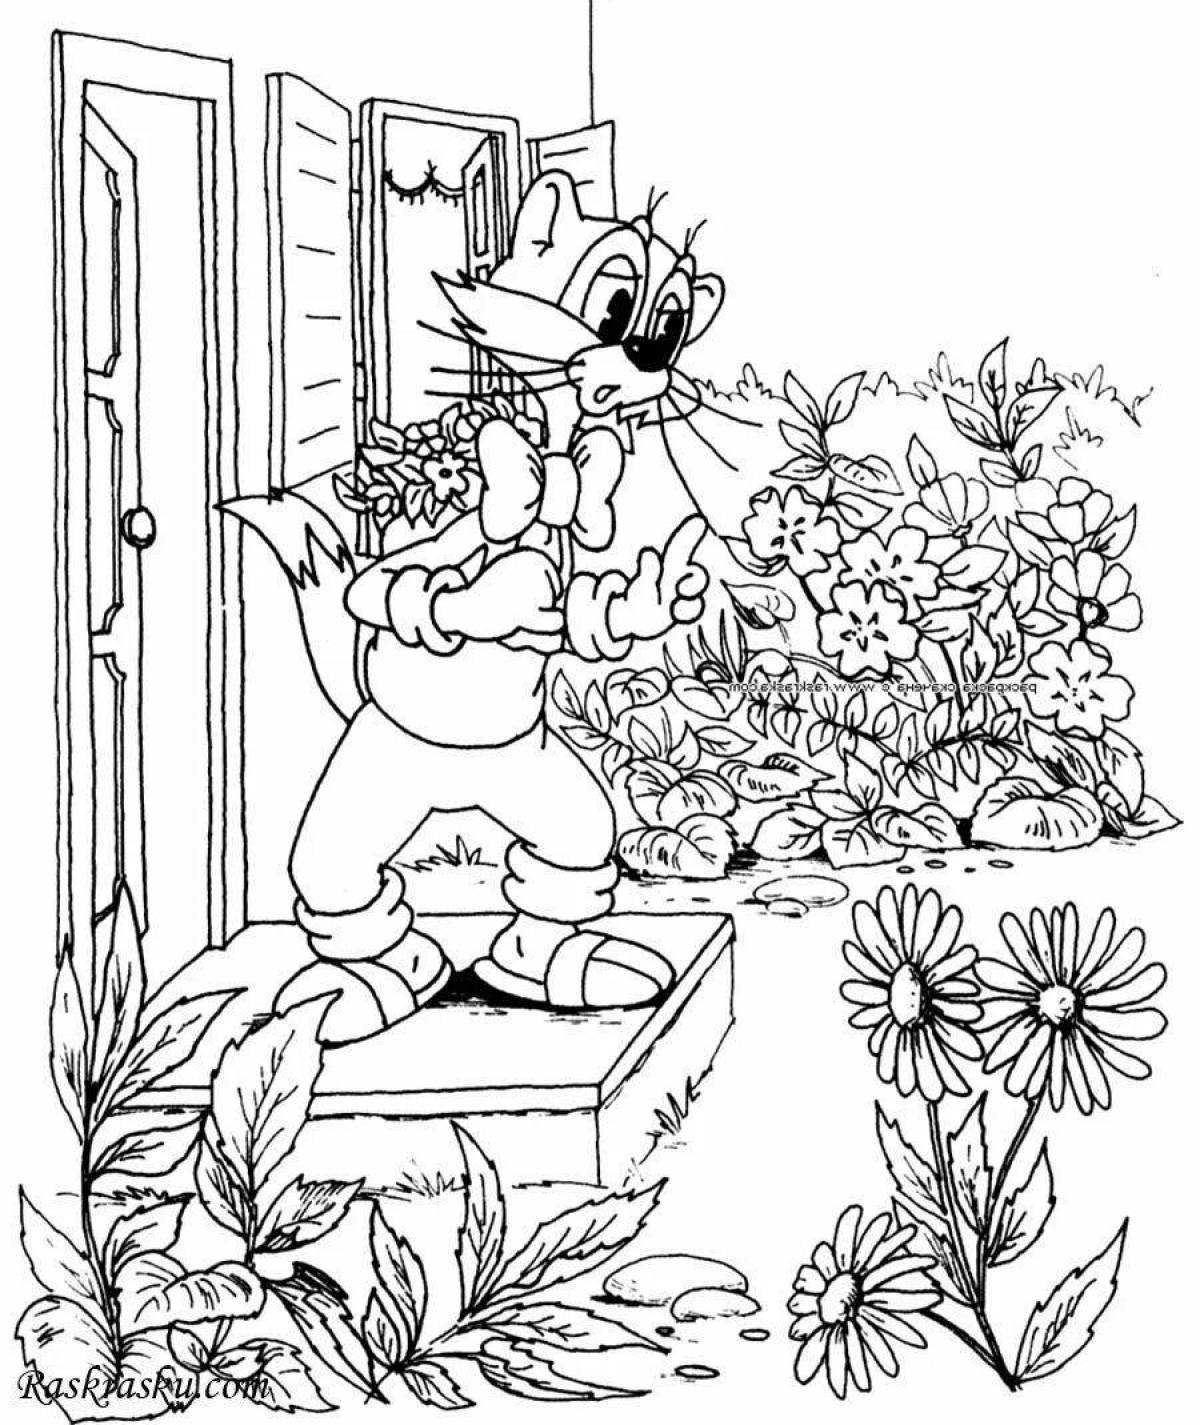 Charming leopold coloring book